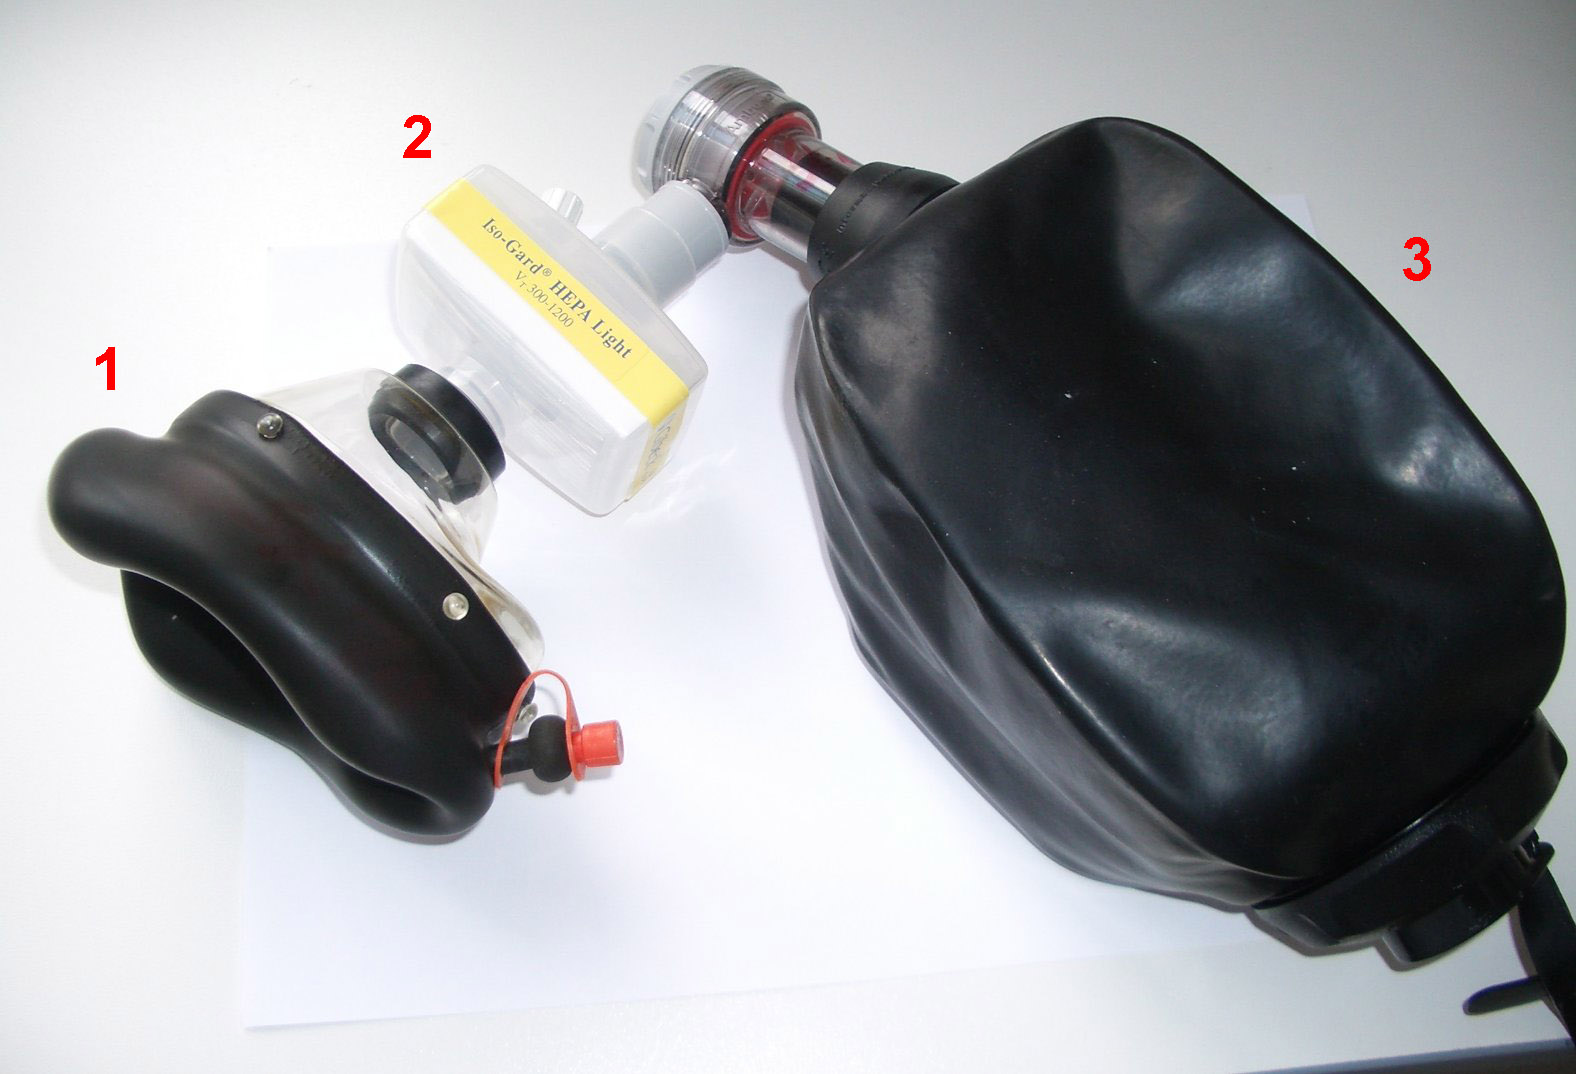 One type of bag valve mask. The part labelled 1 is a flexible mask designed to seal to the patient's face, and the part labelled 3 is a self-filling bag.